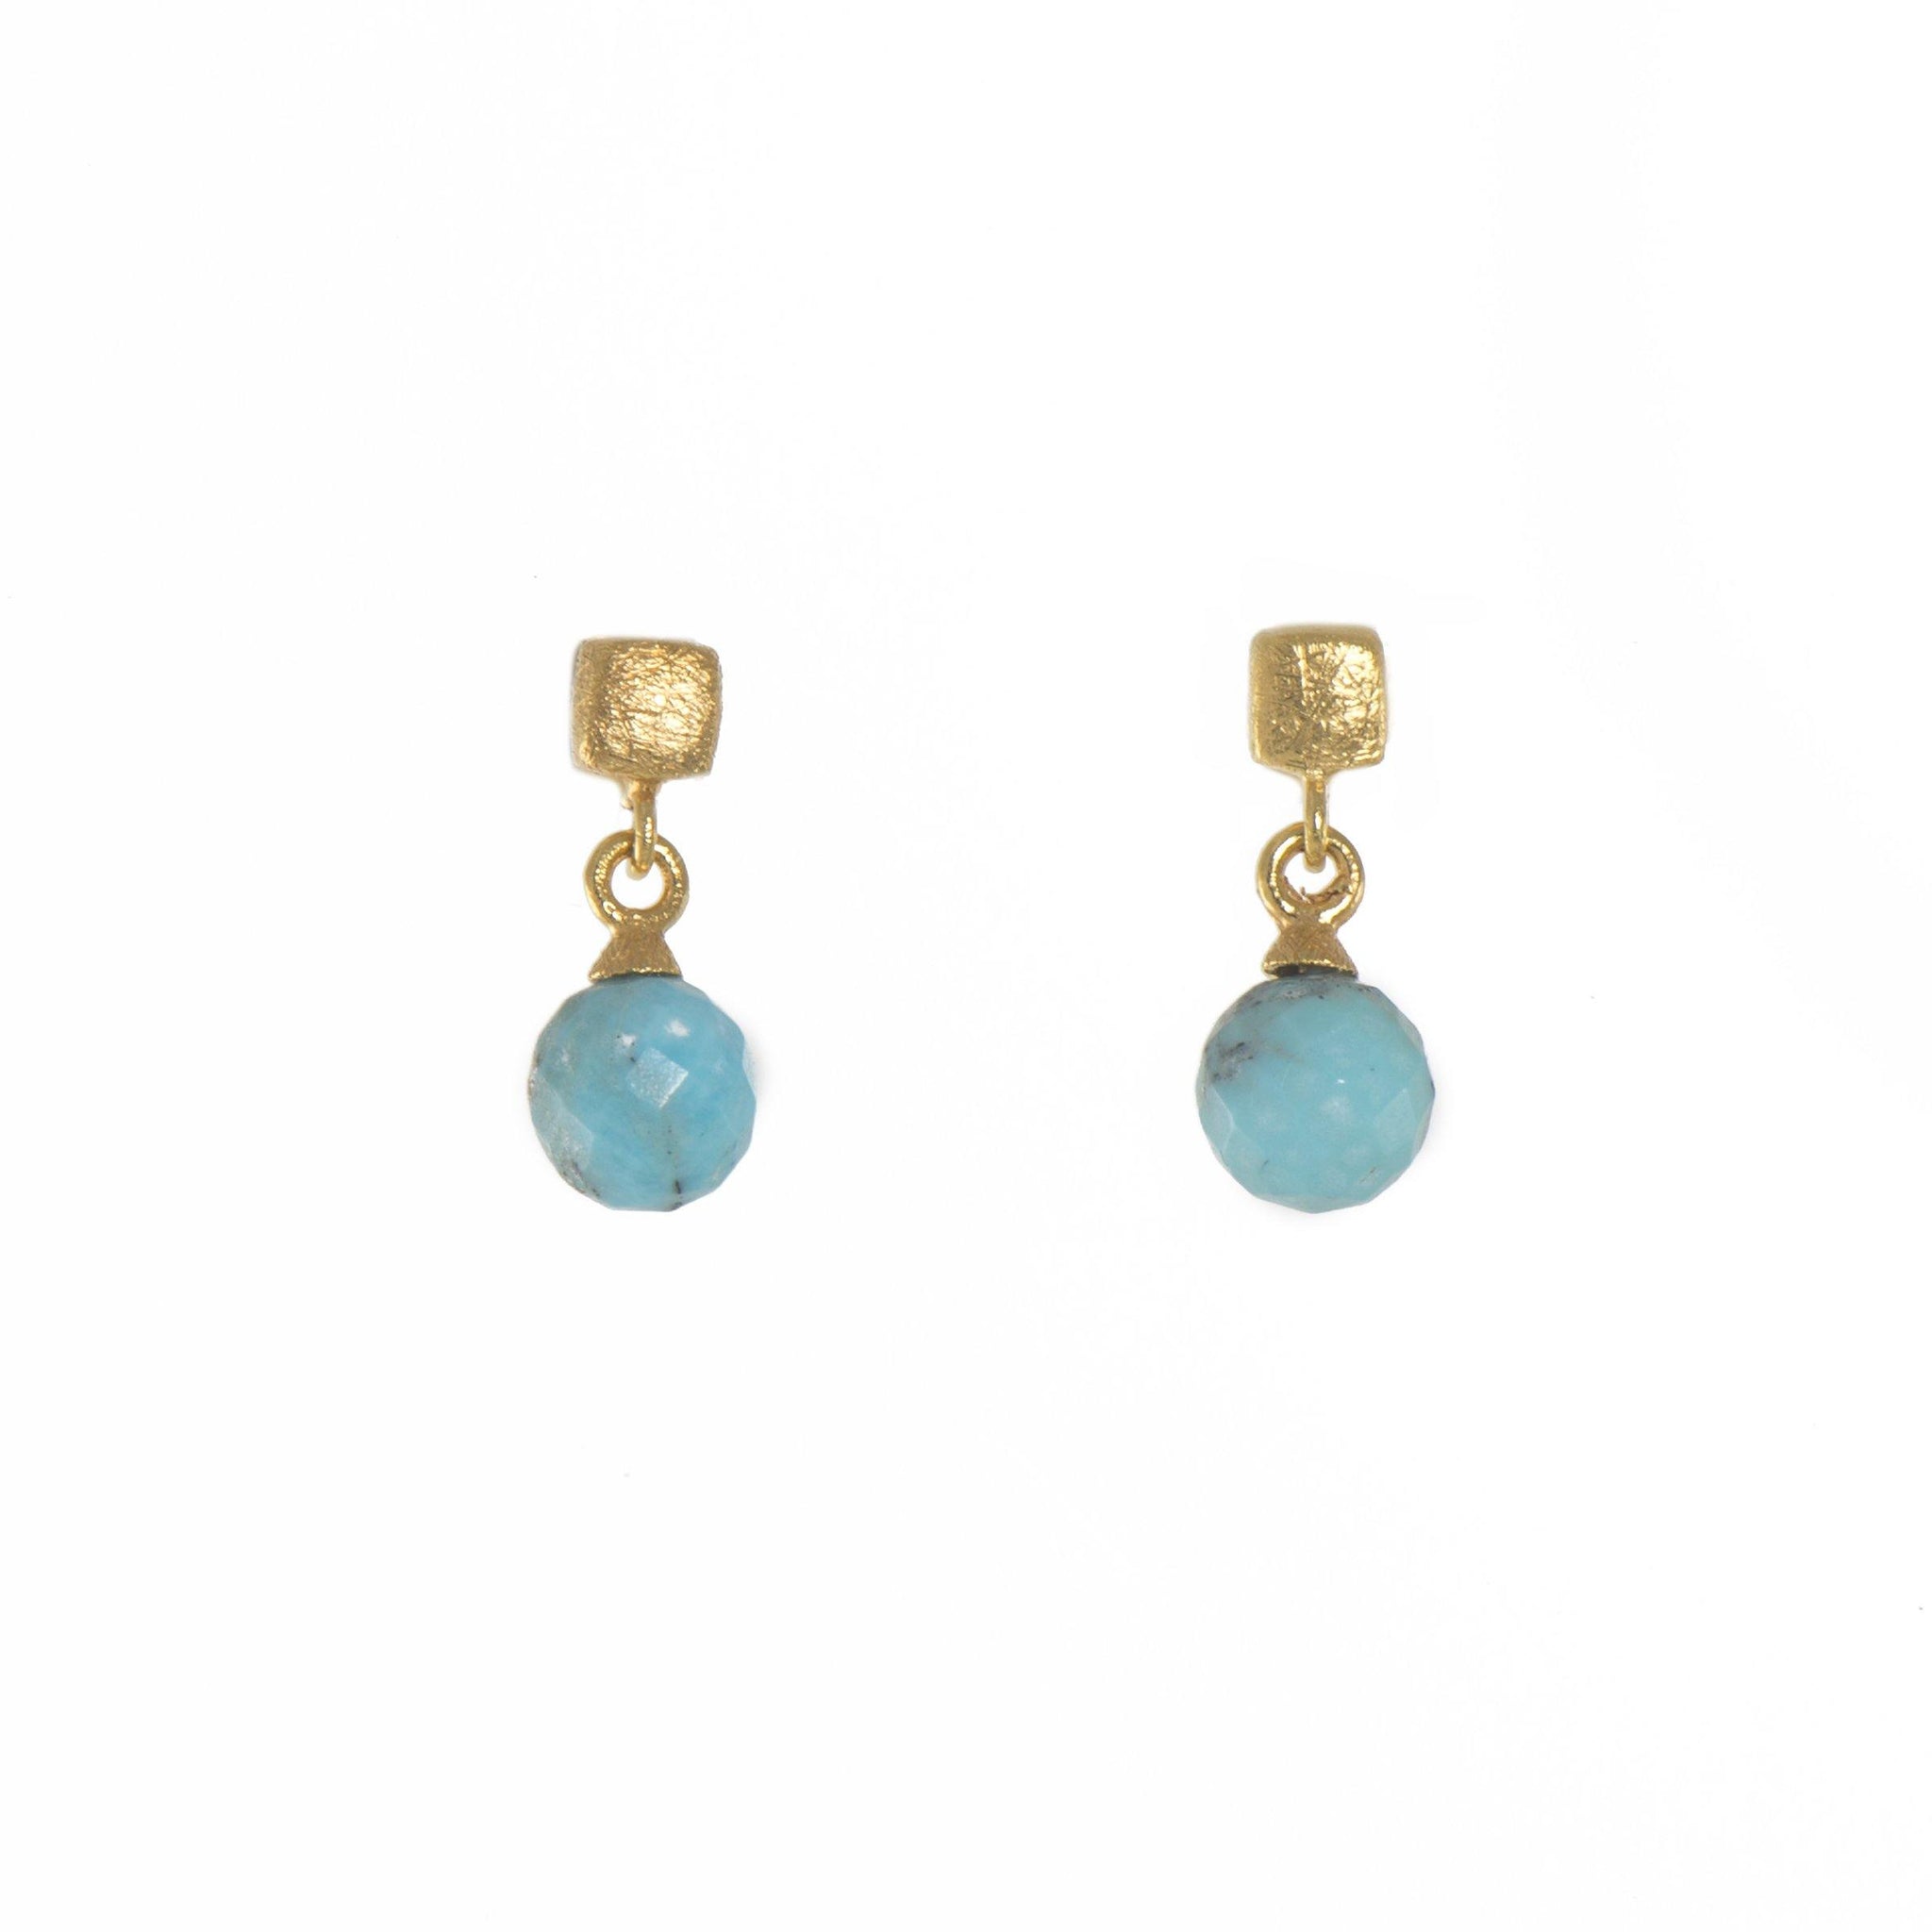 CUBE ROUND FACETED TURQUOISE EARRINGS FAIR TRADE GOLD VERMEIL - Joyla Jewelry